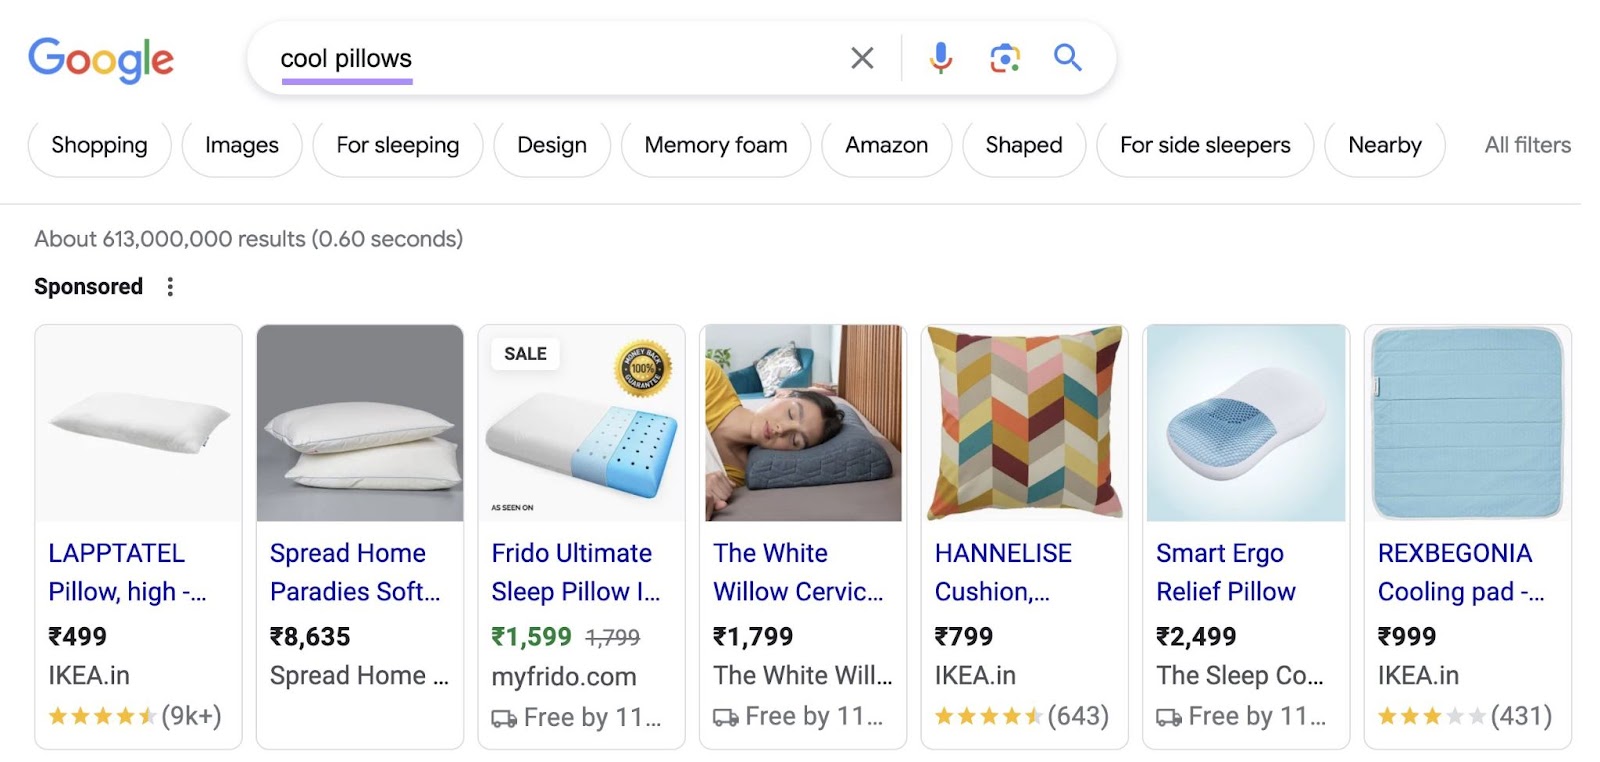 Google shopping ads for "cool pillows" query